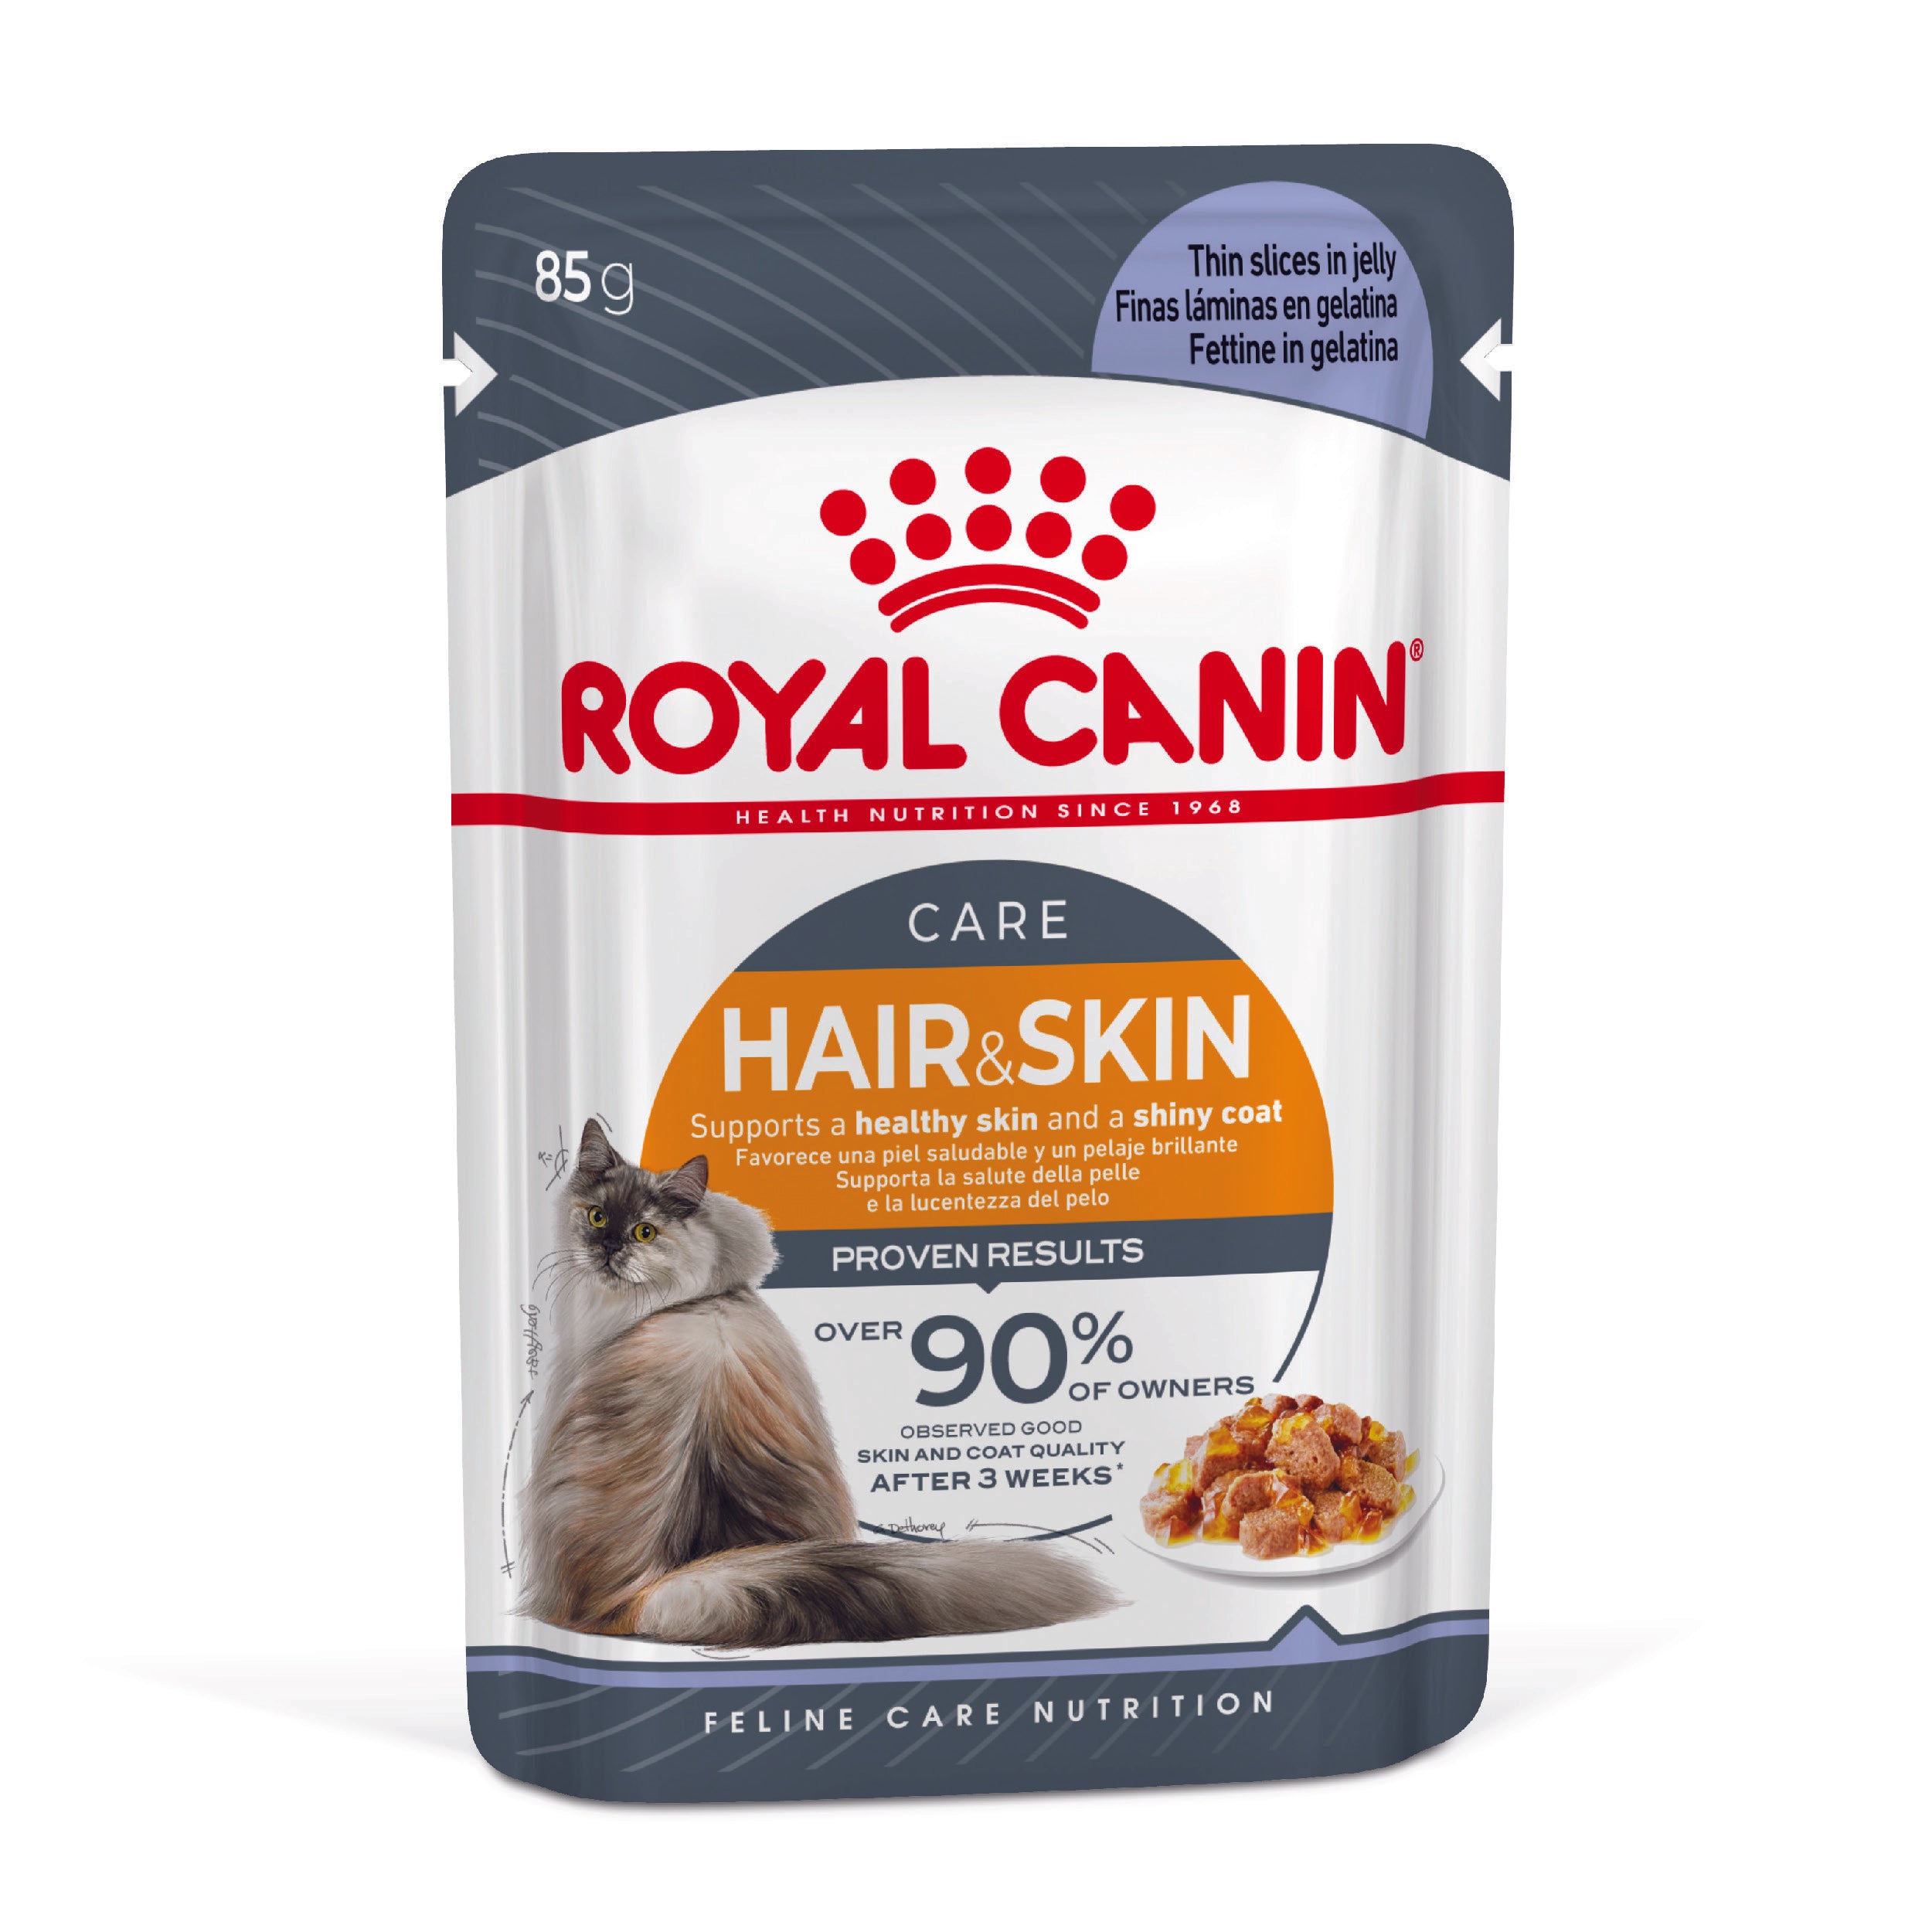 Royal Canin Hair & Skin Care in Jelly Adult Wet Cat Food 12 x 85g